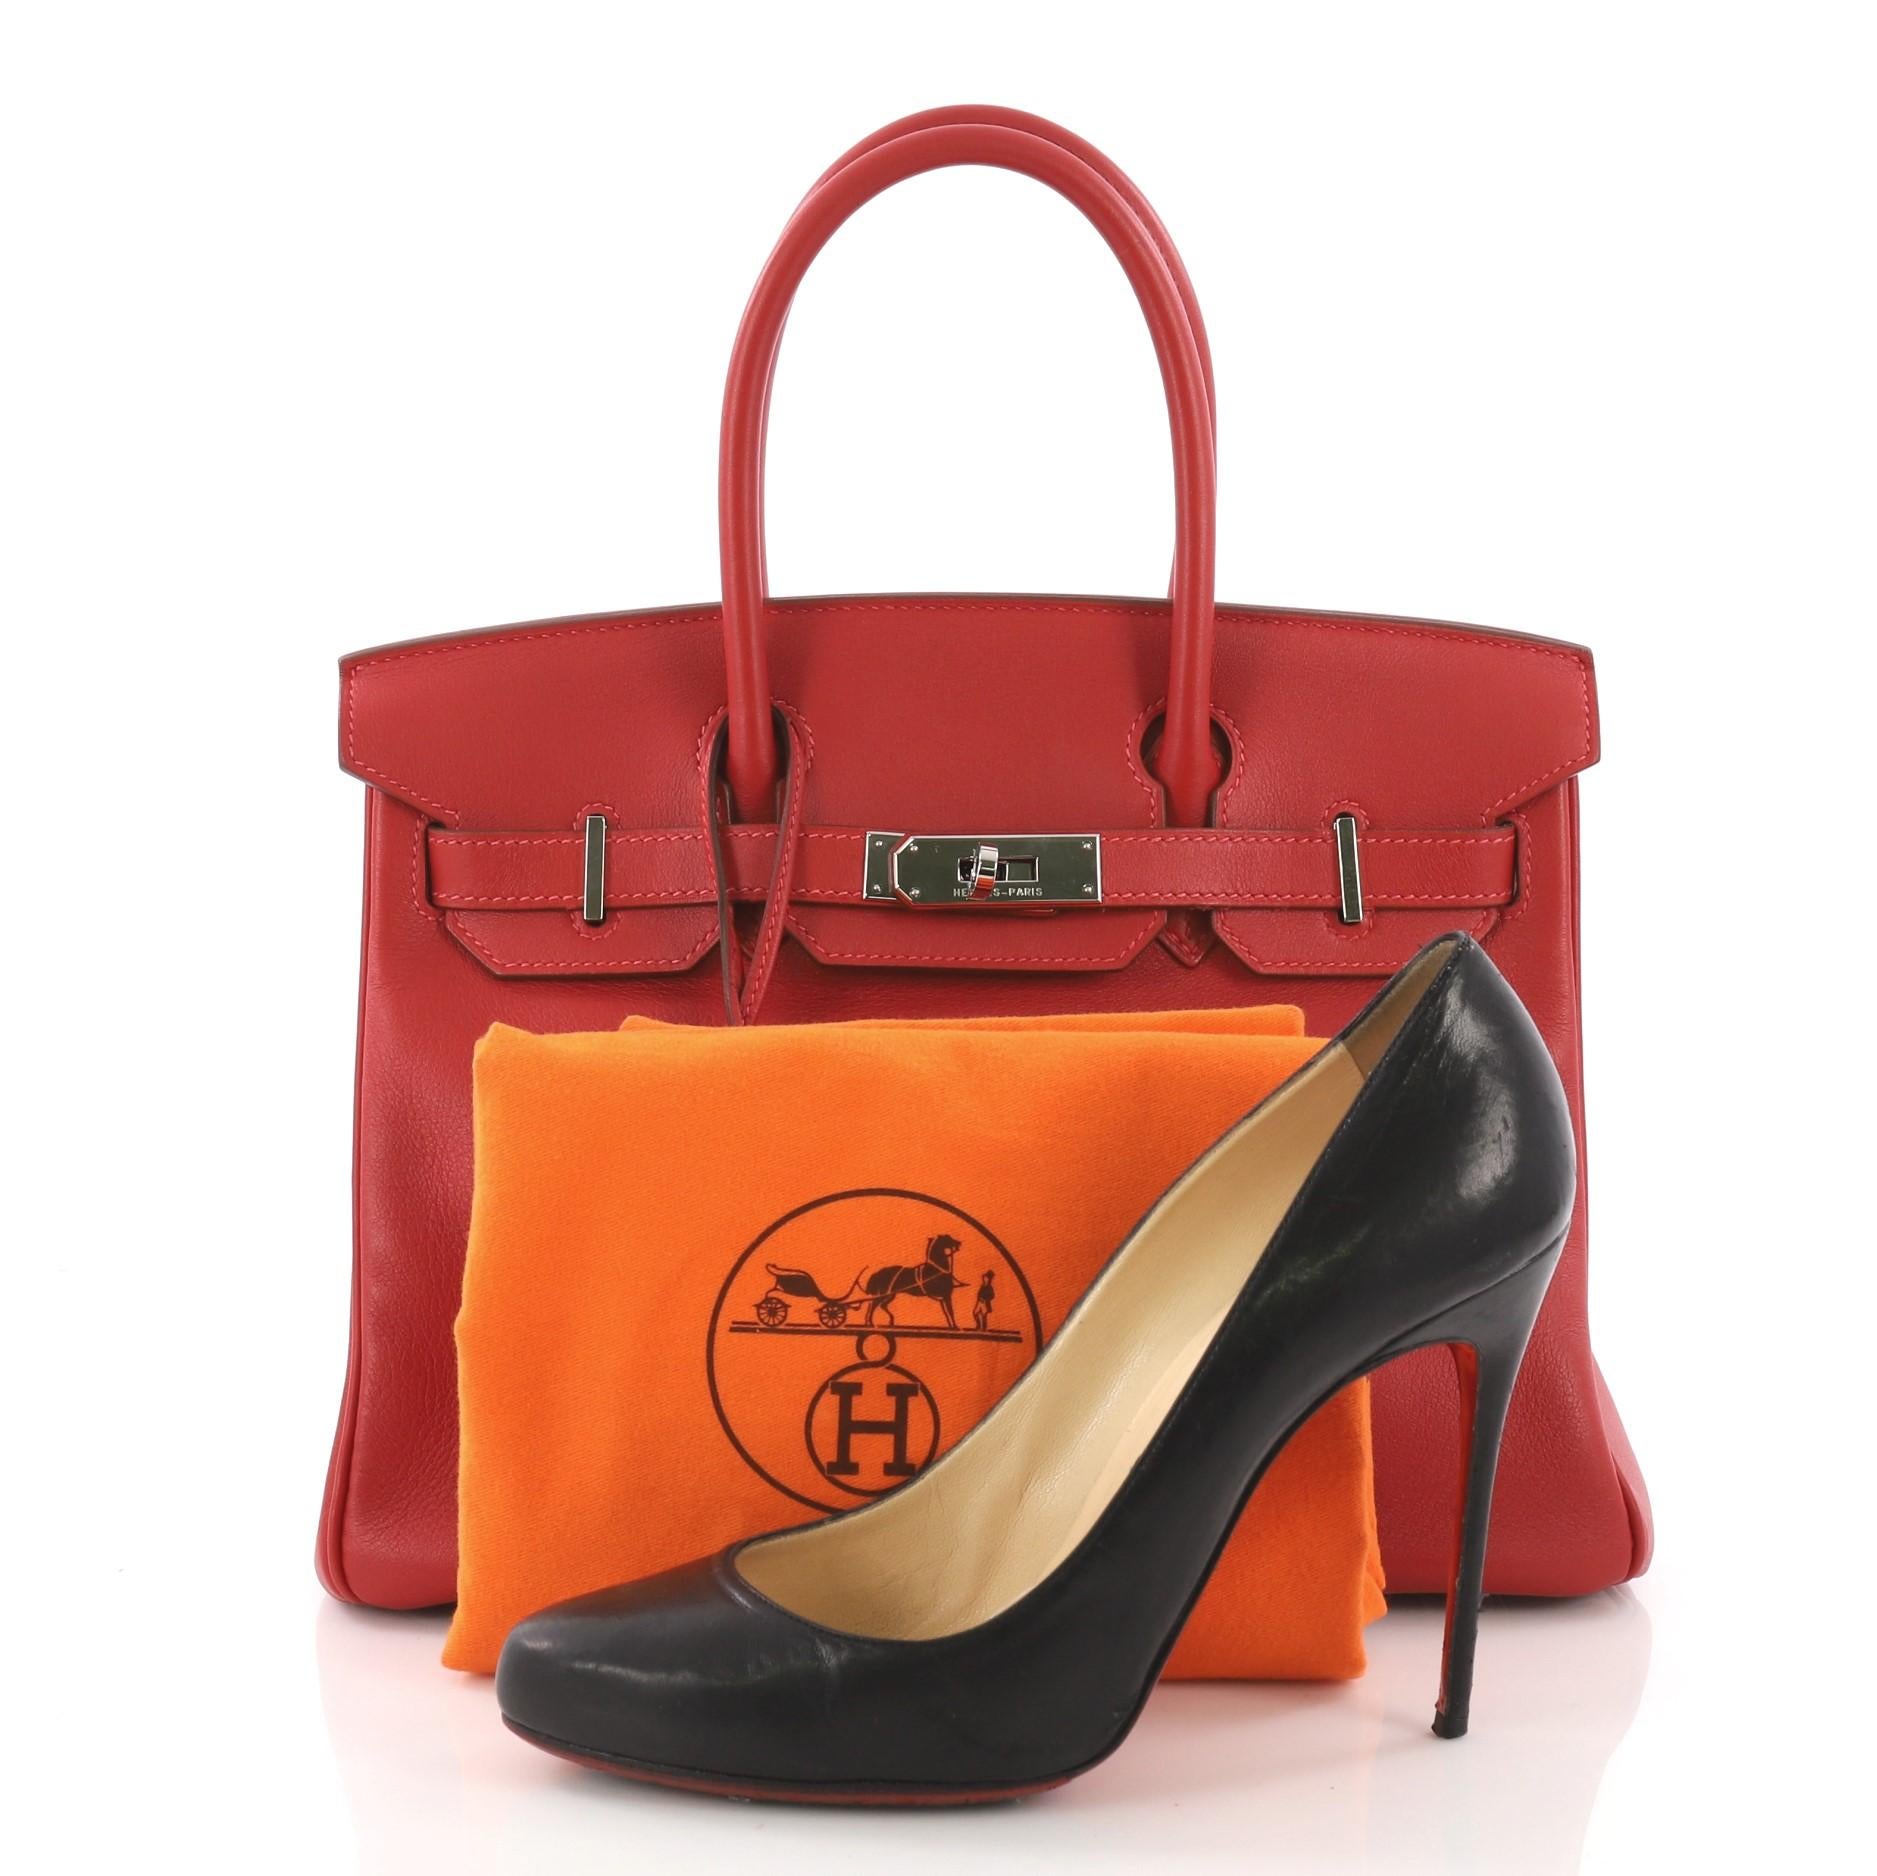 This Hermes Birkin Handbag Rouge Vif Swift with Palladium Hardware 30, crafted in Rouge Vif red swift leather, features dual rolled handles, front flap and palladium-tone hardware. Its turn-lock closure opens to a red leather interior with slip and